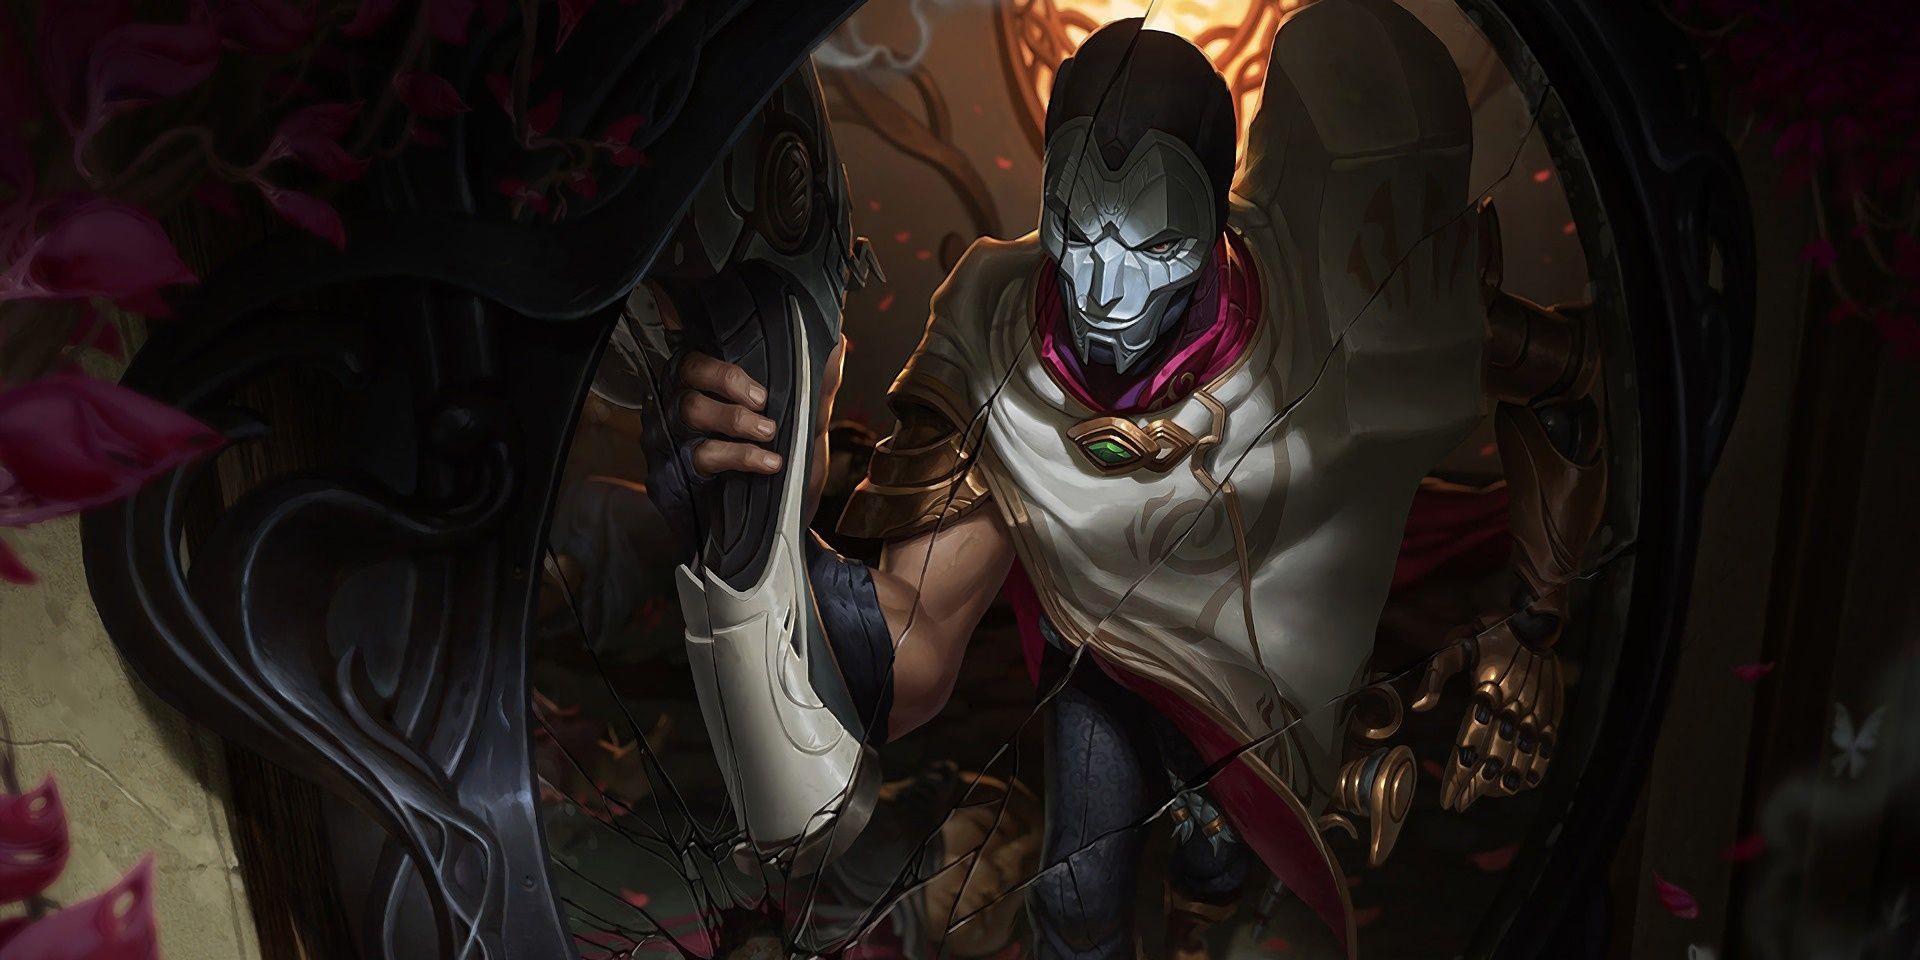 Jhin Holding Weapon Looking To Cracked Mirror